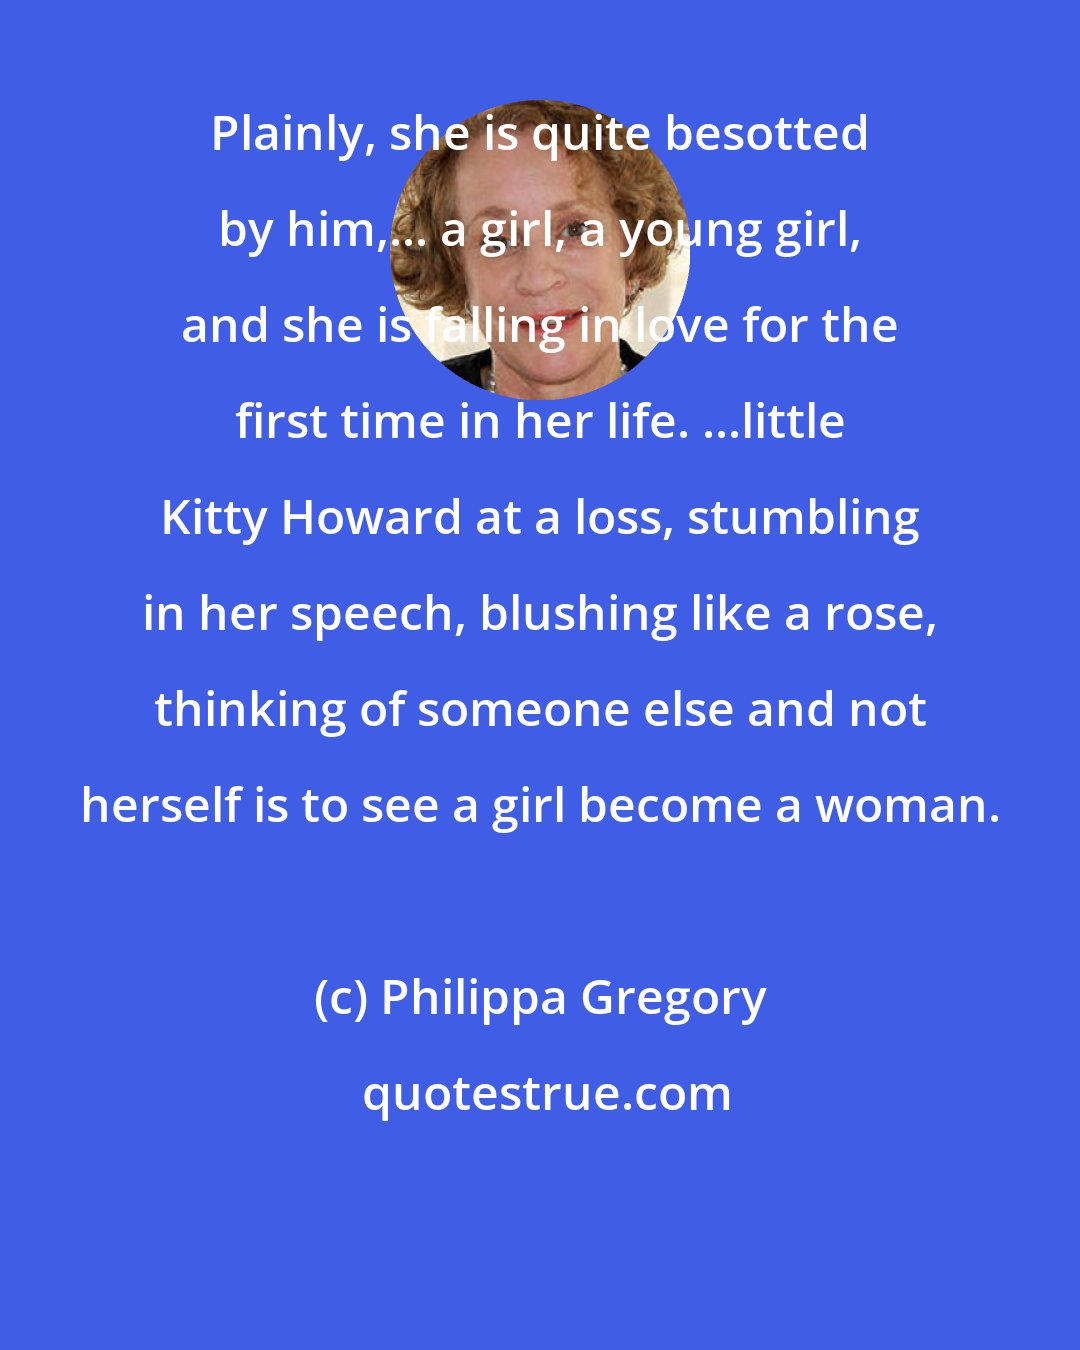 Philippa Gregory: Plainly, she is quite besotted by him,... a girl, a young girl, and she is falling in love for the first time in her life. ...little Kitty Howard at a loss, stumbling in her speech, blushing like a rose, thinking of someone else and not herself is to see a girl become a woman.